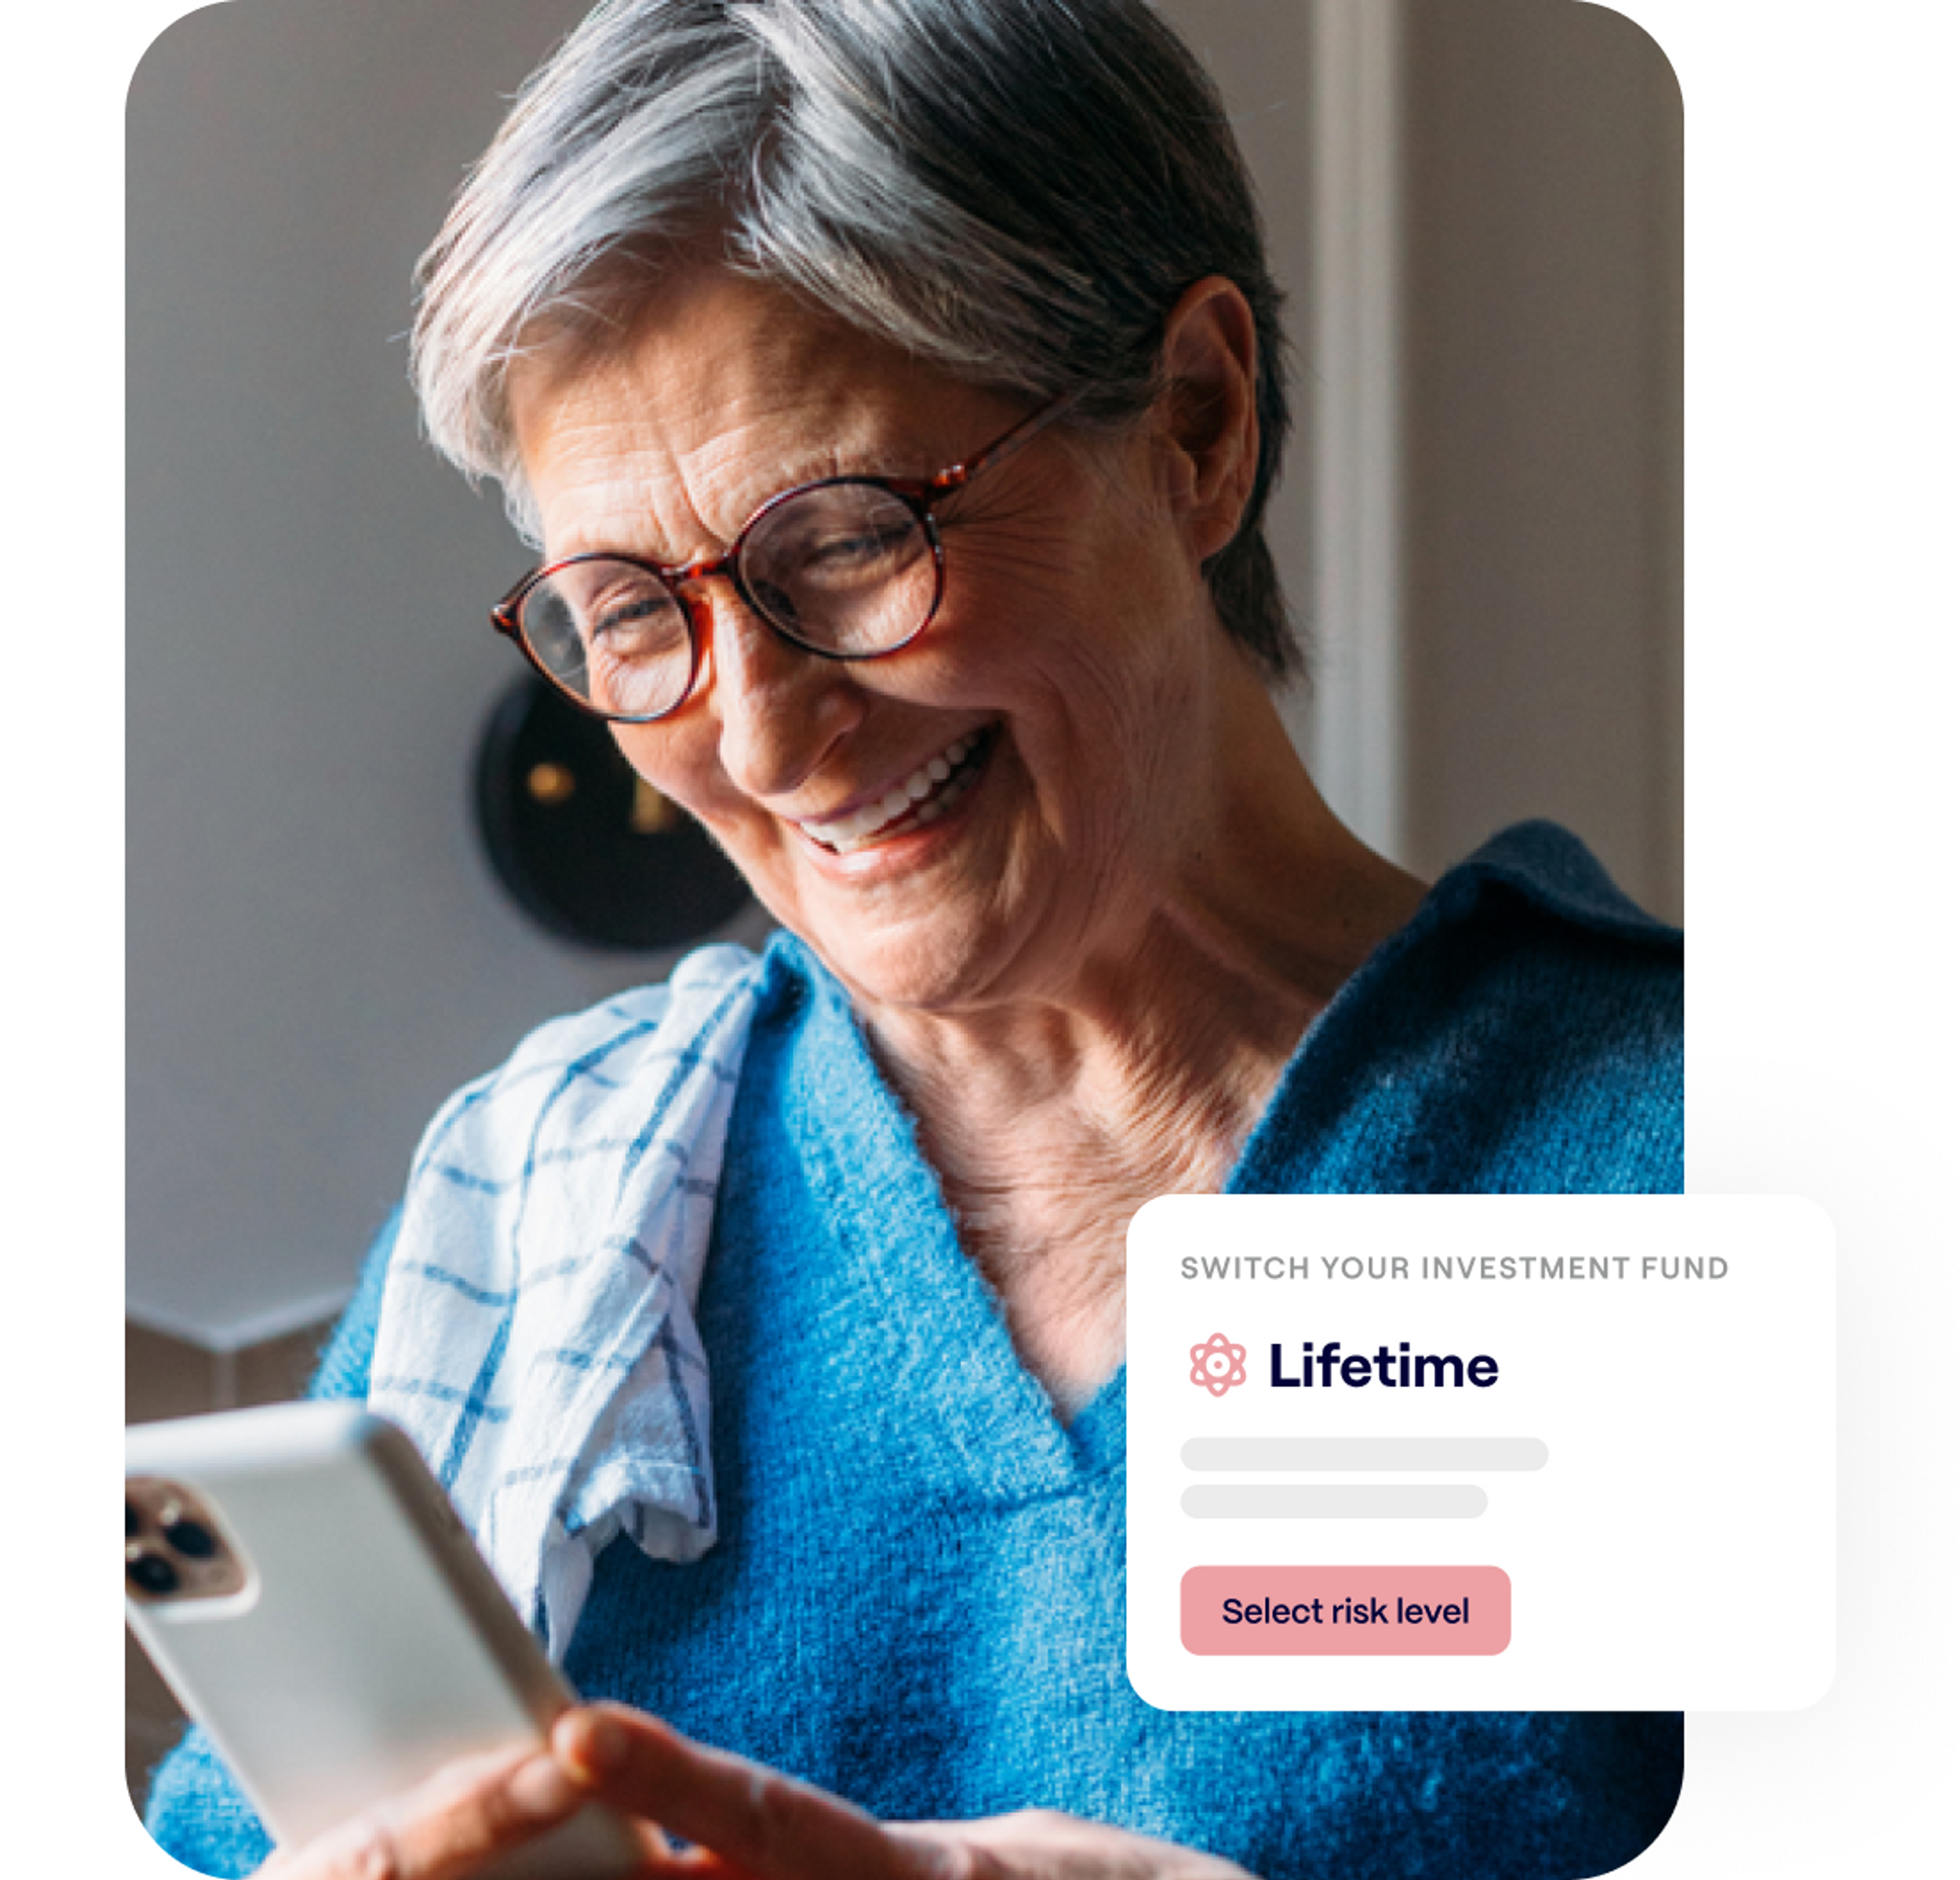 A photo of a smiling woman looking down at a phone and an excerpt of the Penfold pension app showing the lifetime investment fund screen